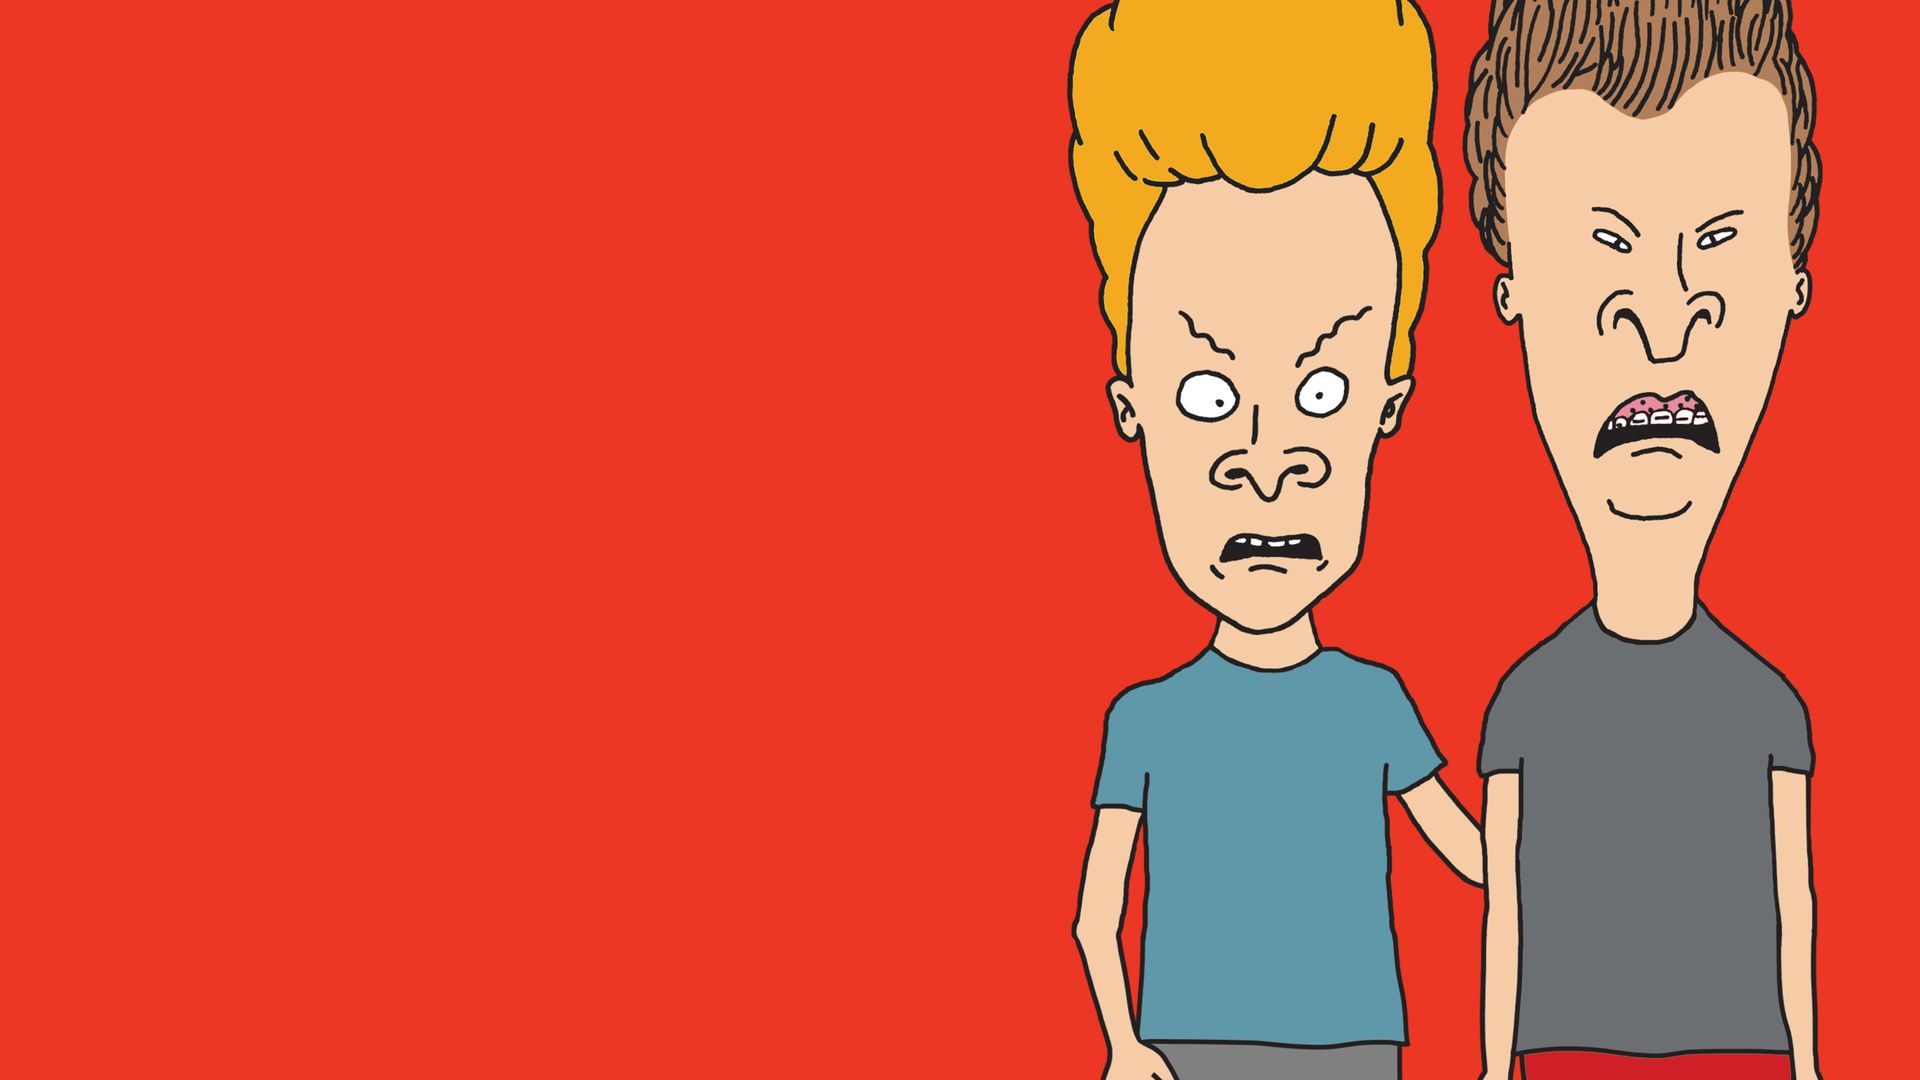 download beavis and butthead paramount plus